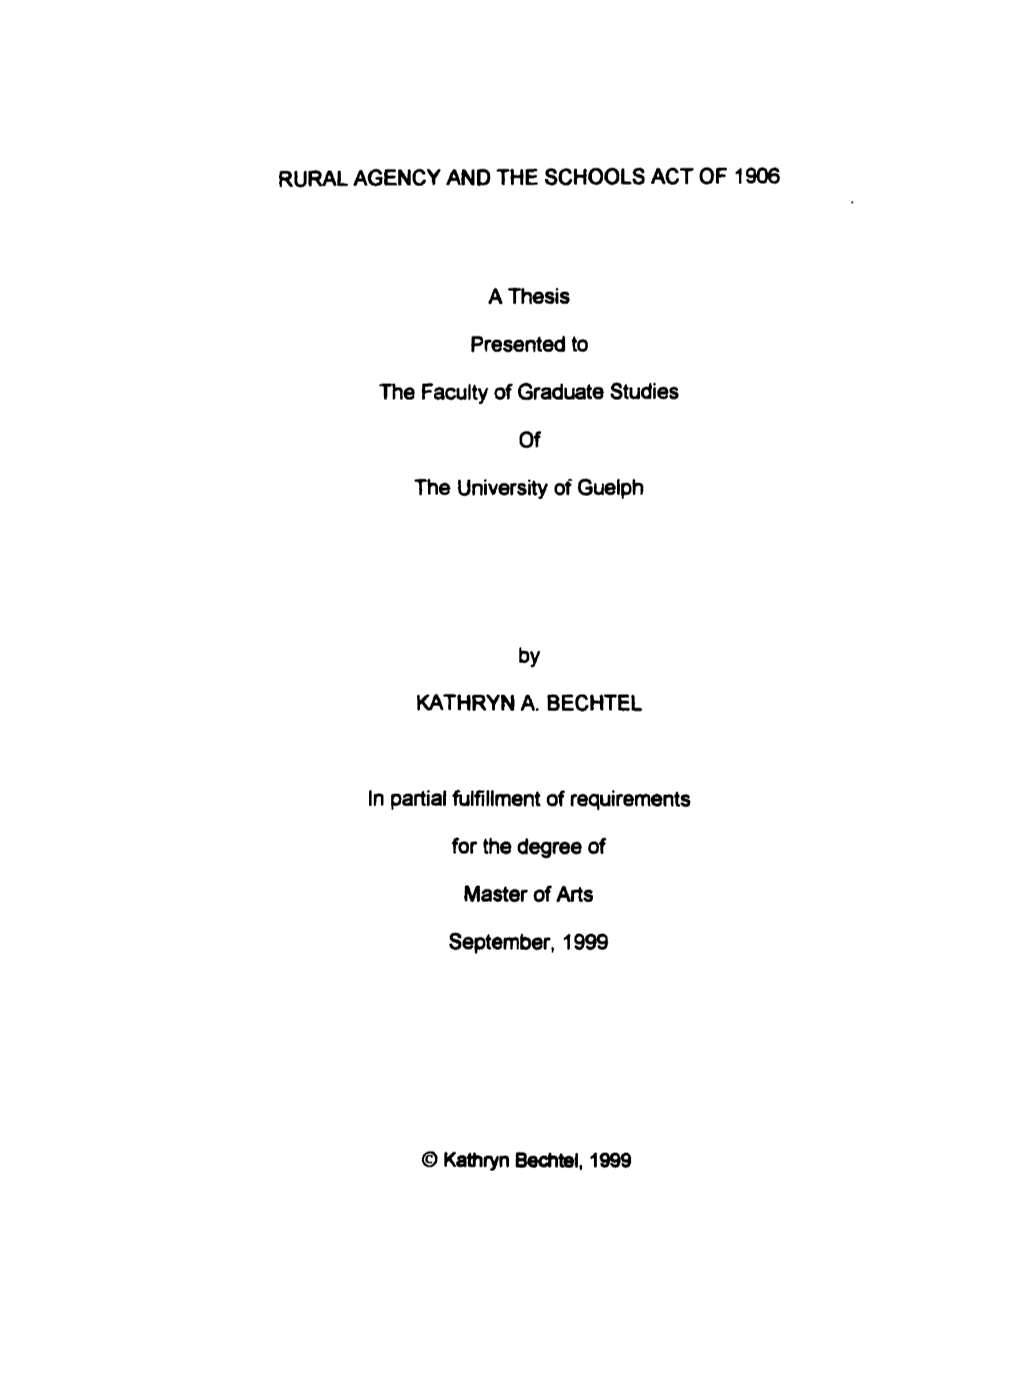 RURAL AGENCY and the SCHOOLS ACT of 1906 a Thesis